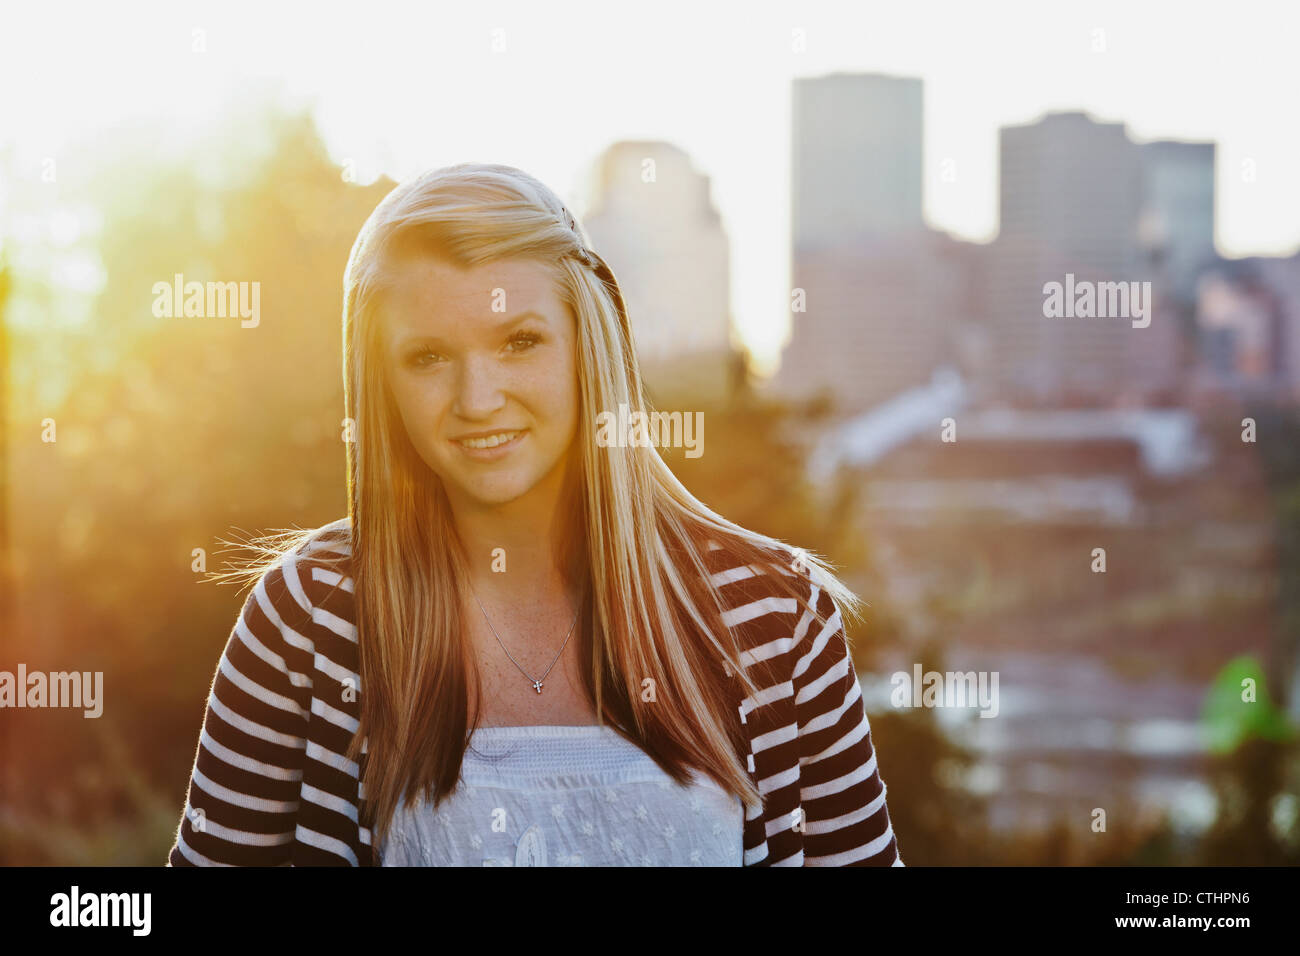 Portrait Of A Young Woman In A Park With The City Skyline In The Background; Edmonton, Alberta, Canada Stock Photo